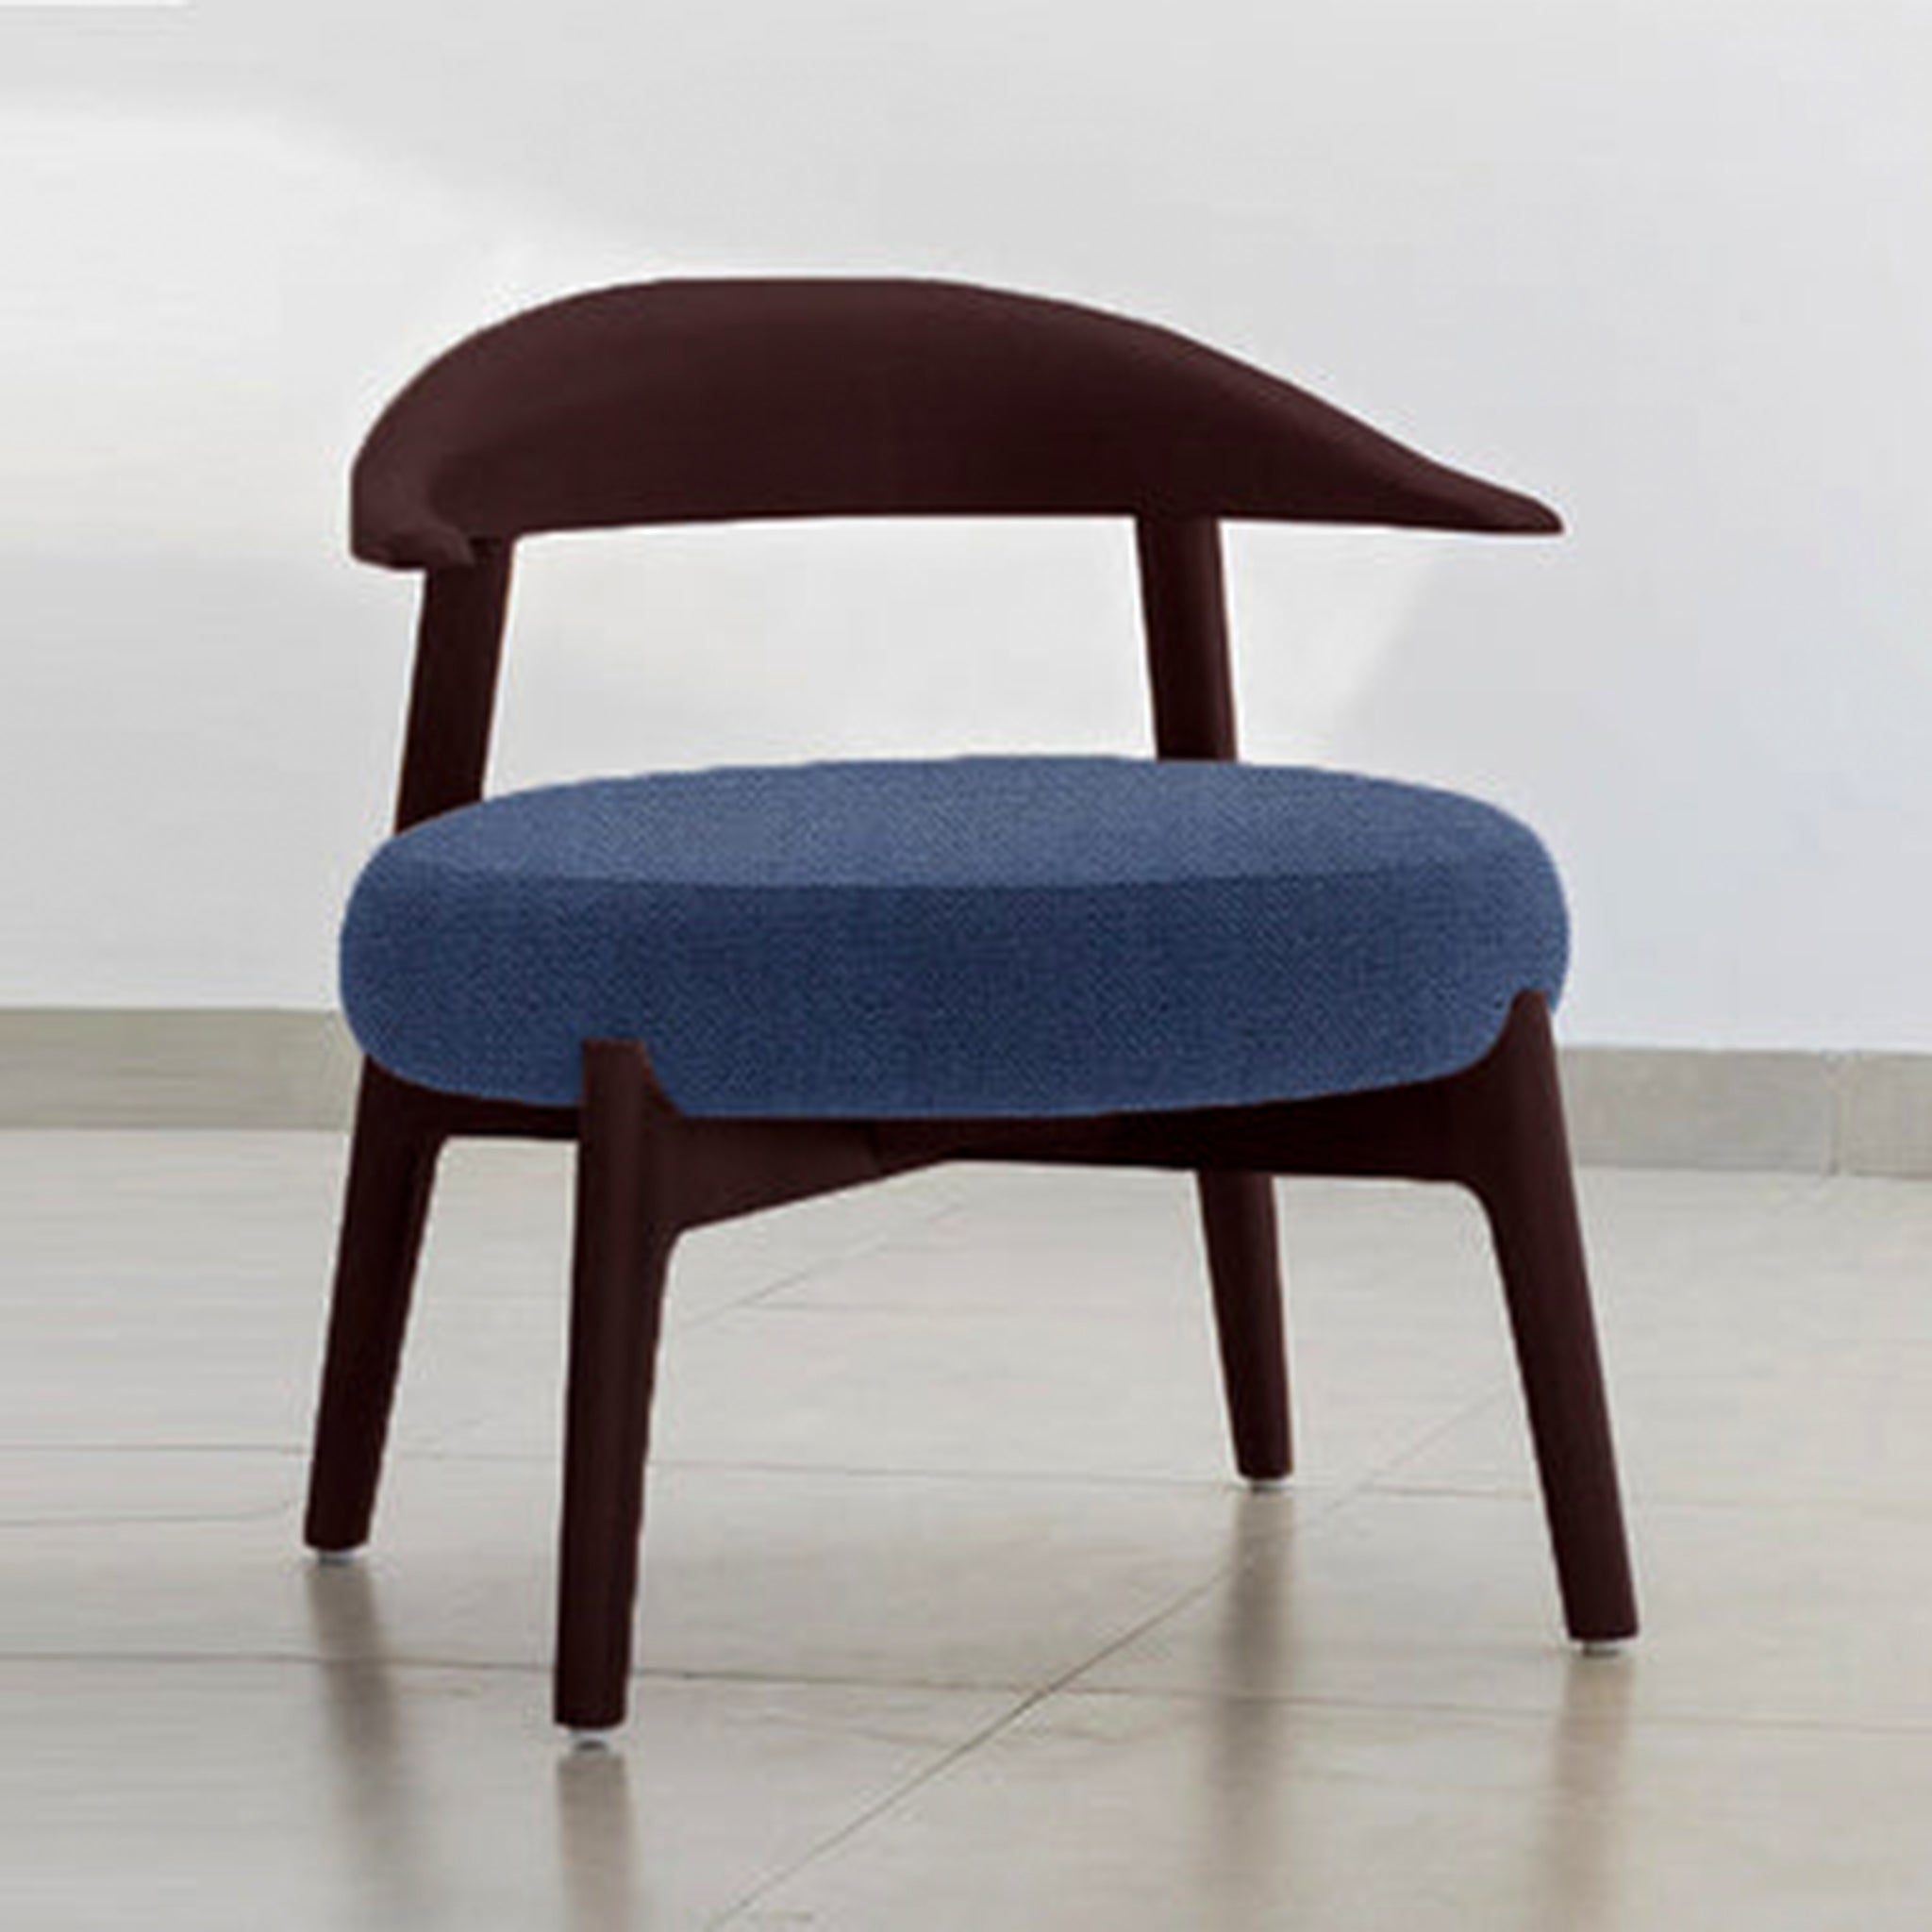 "The Hyde Accent Chair with sleek wooden design and comfortable fabric"